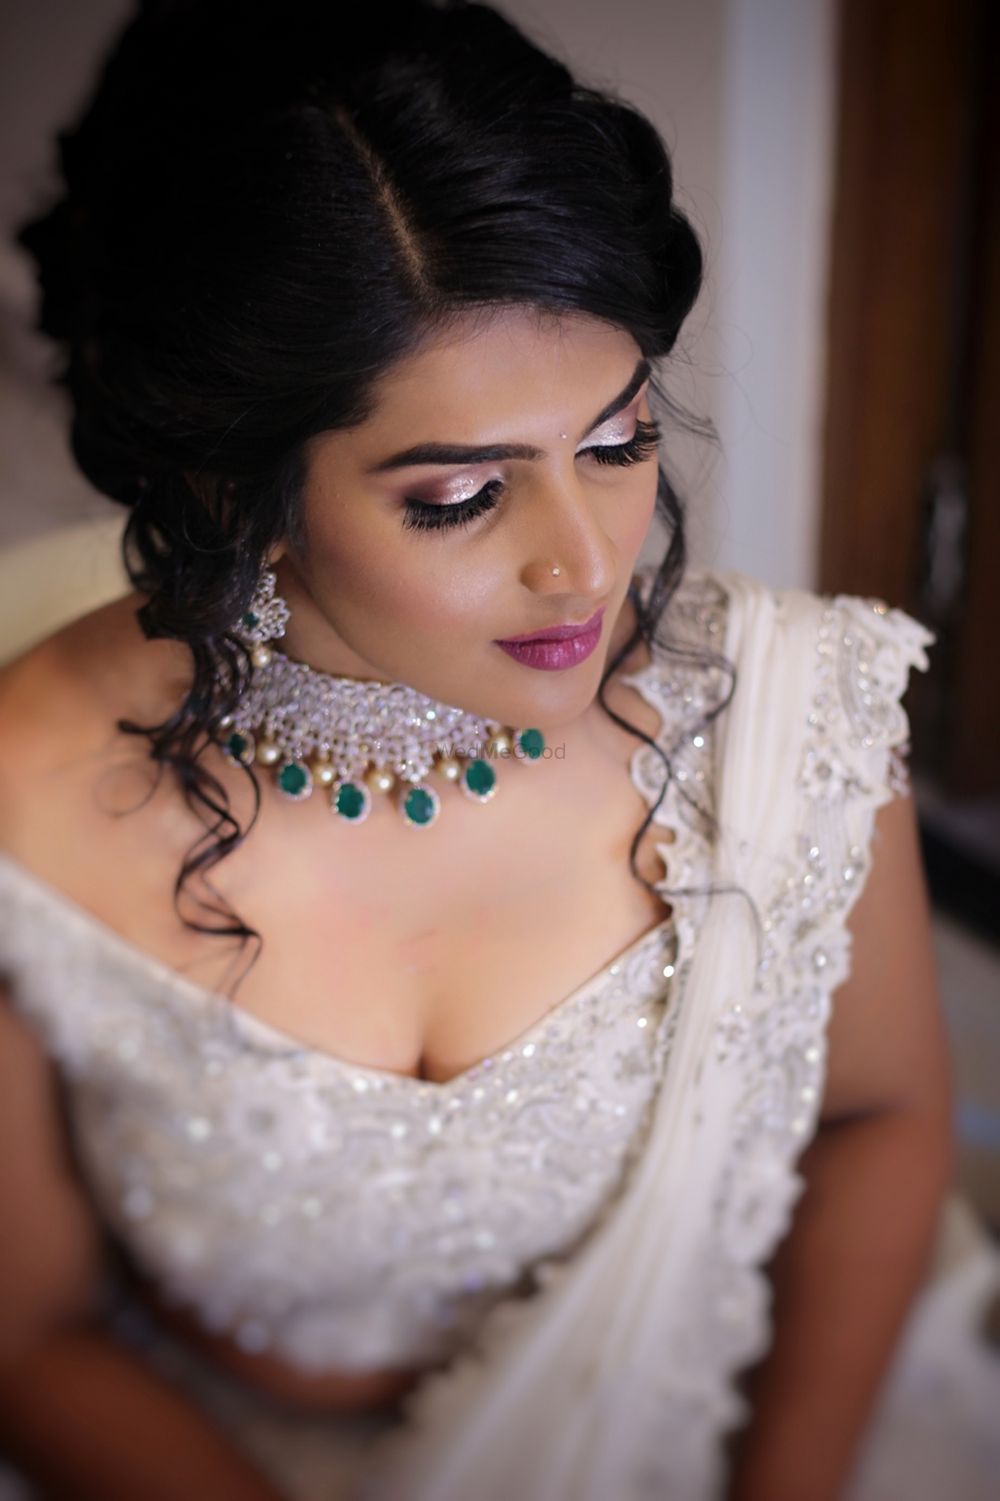 Photo of Shimmery eye makeup for engagement with contrasting necklace